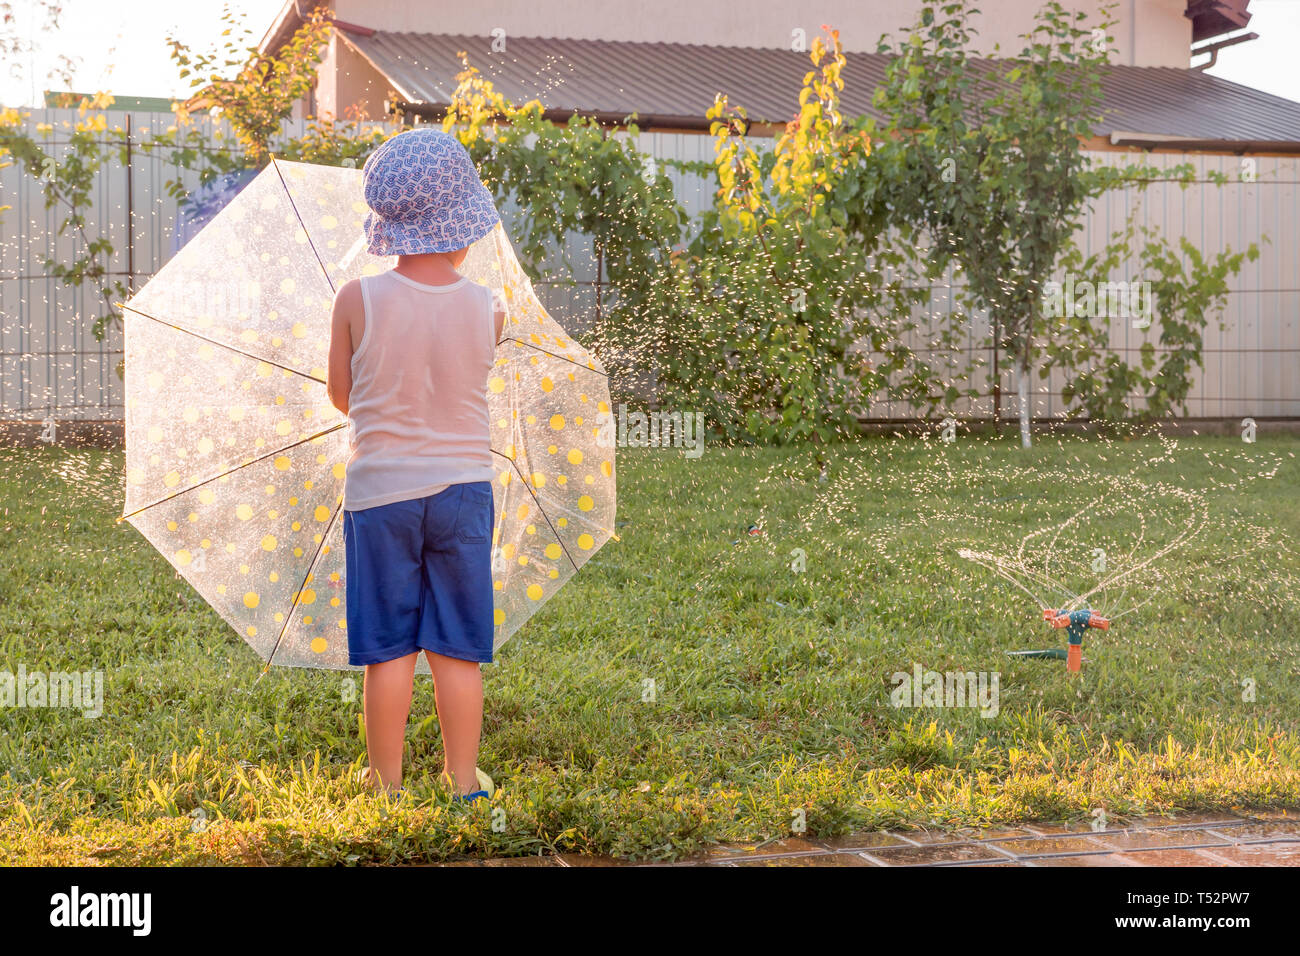 Happy childhood concept. Summer holidays with children. Automatic plant watering system. Preschooler having fun on front yard near watering system Stock Photo